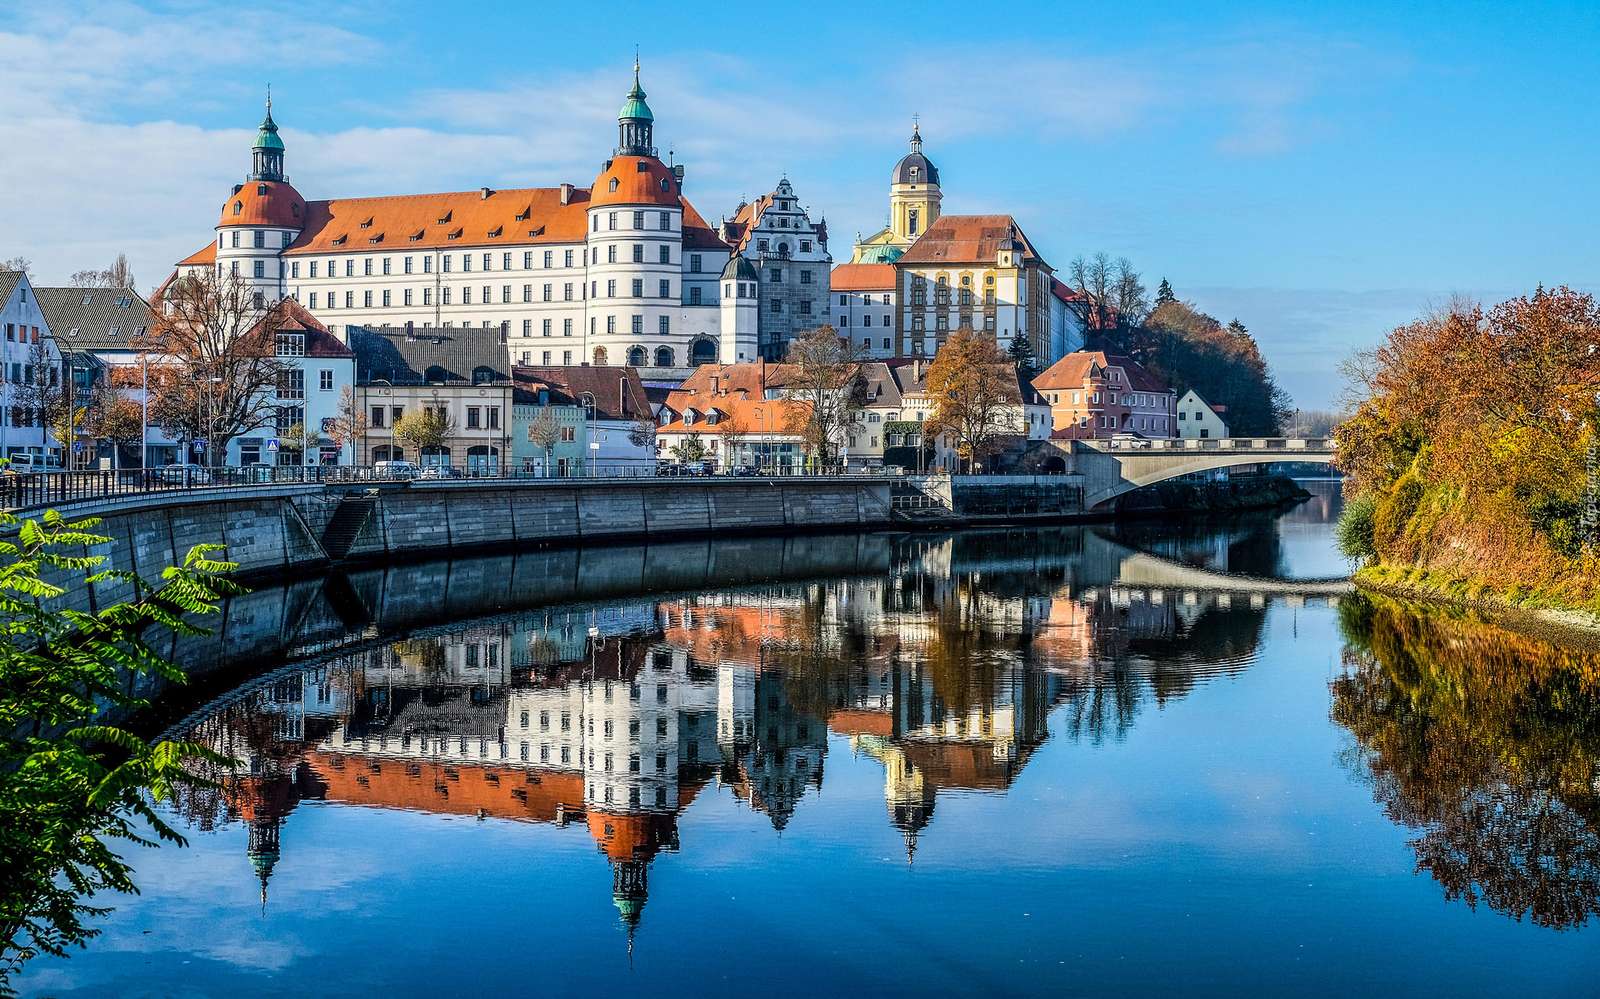 Palace on the Danube online puzzle